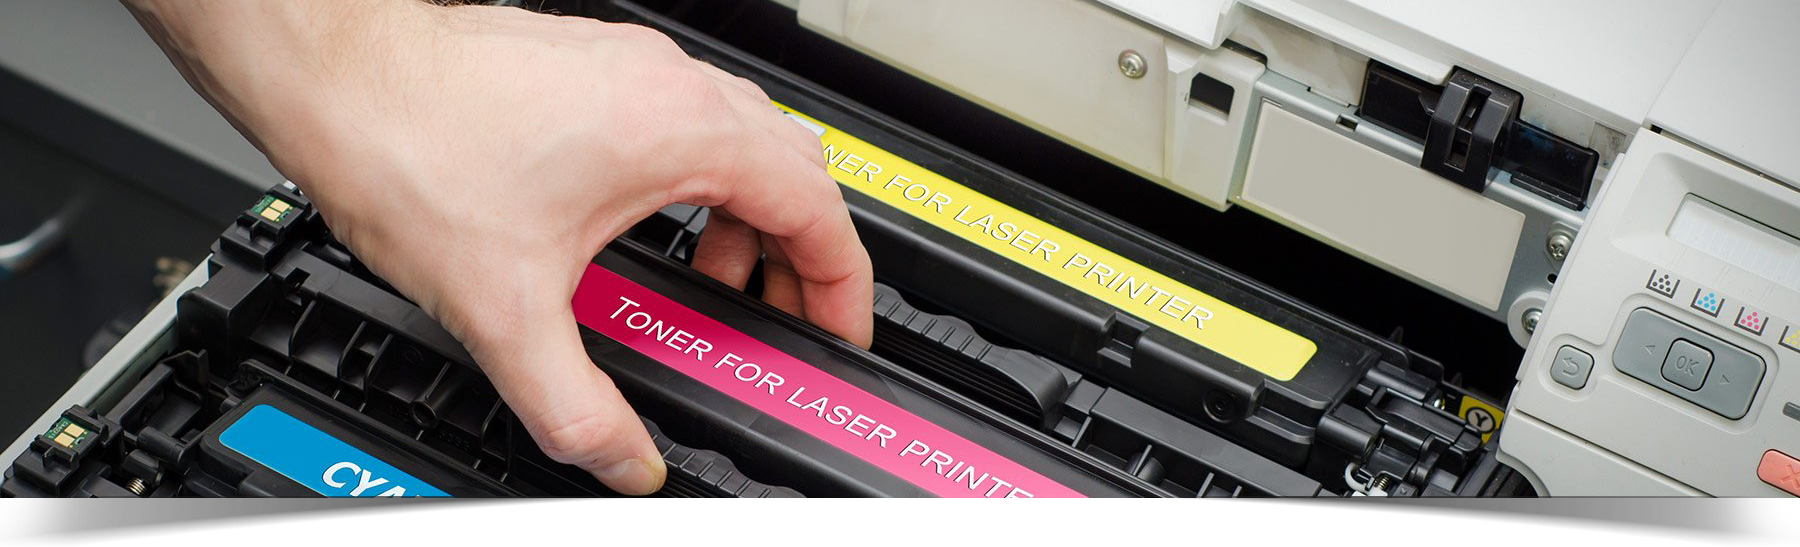 Print Source carries a wide variety of OEM toner and aftermarket cartridges, printer cartridges, for all your business printing needs.